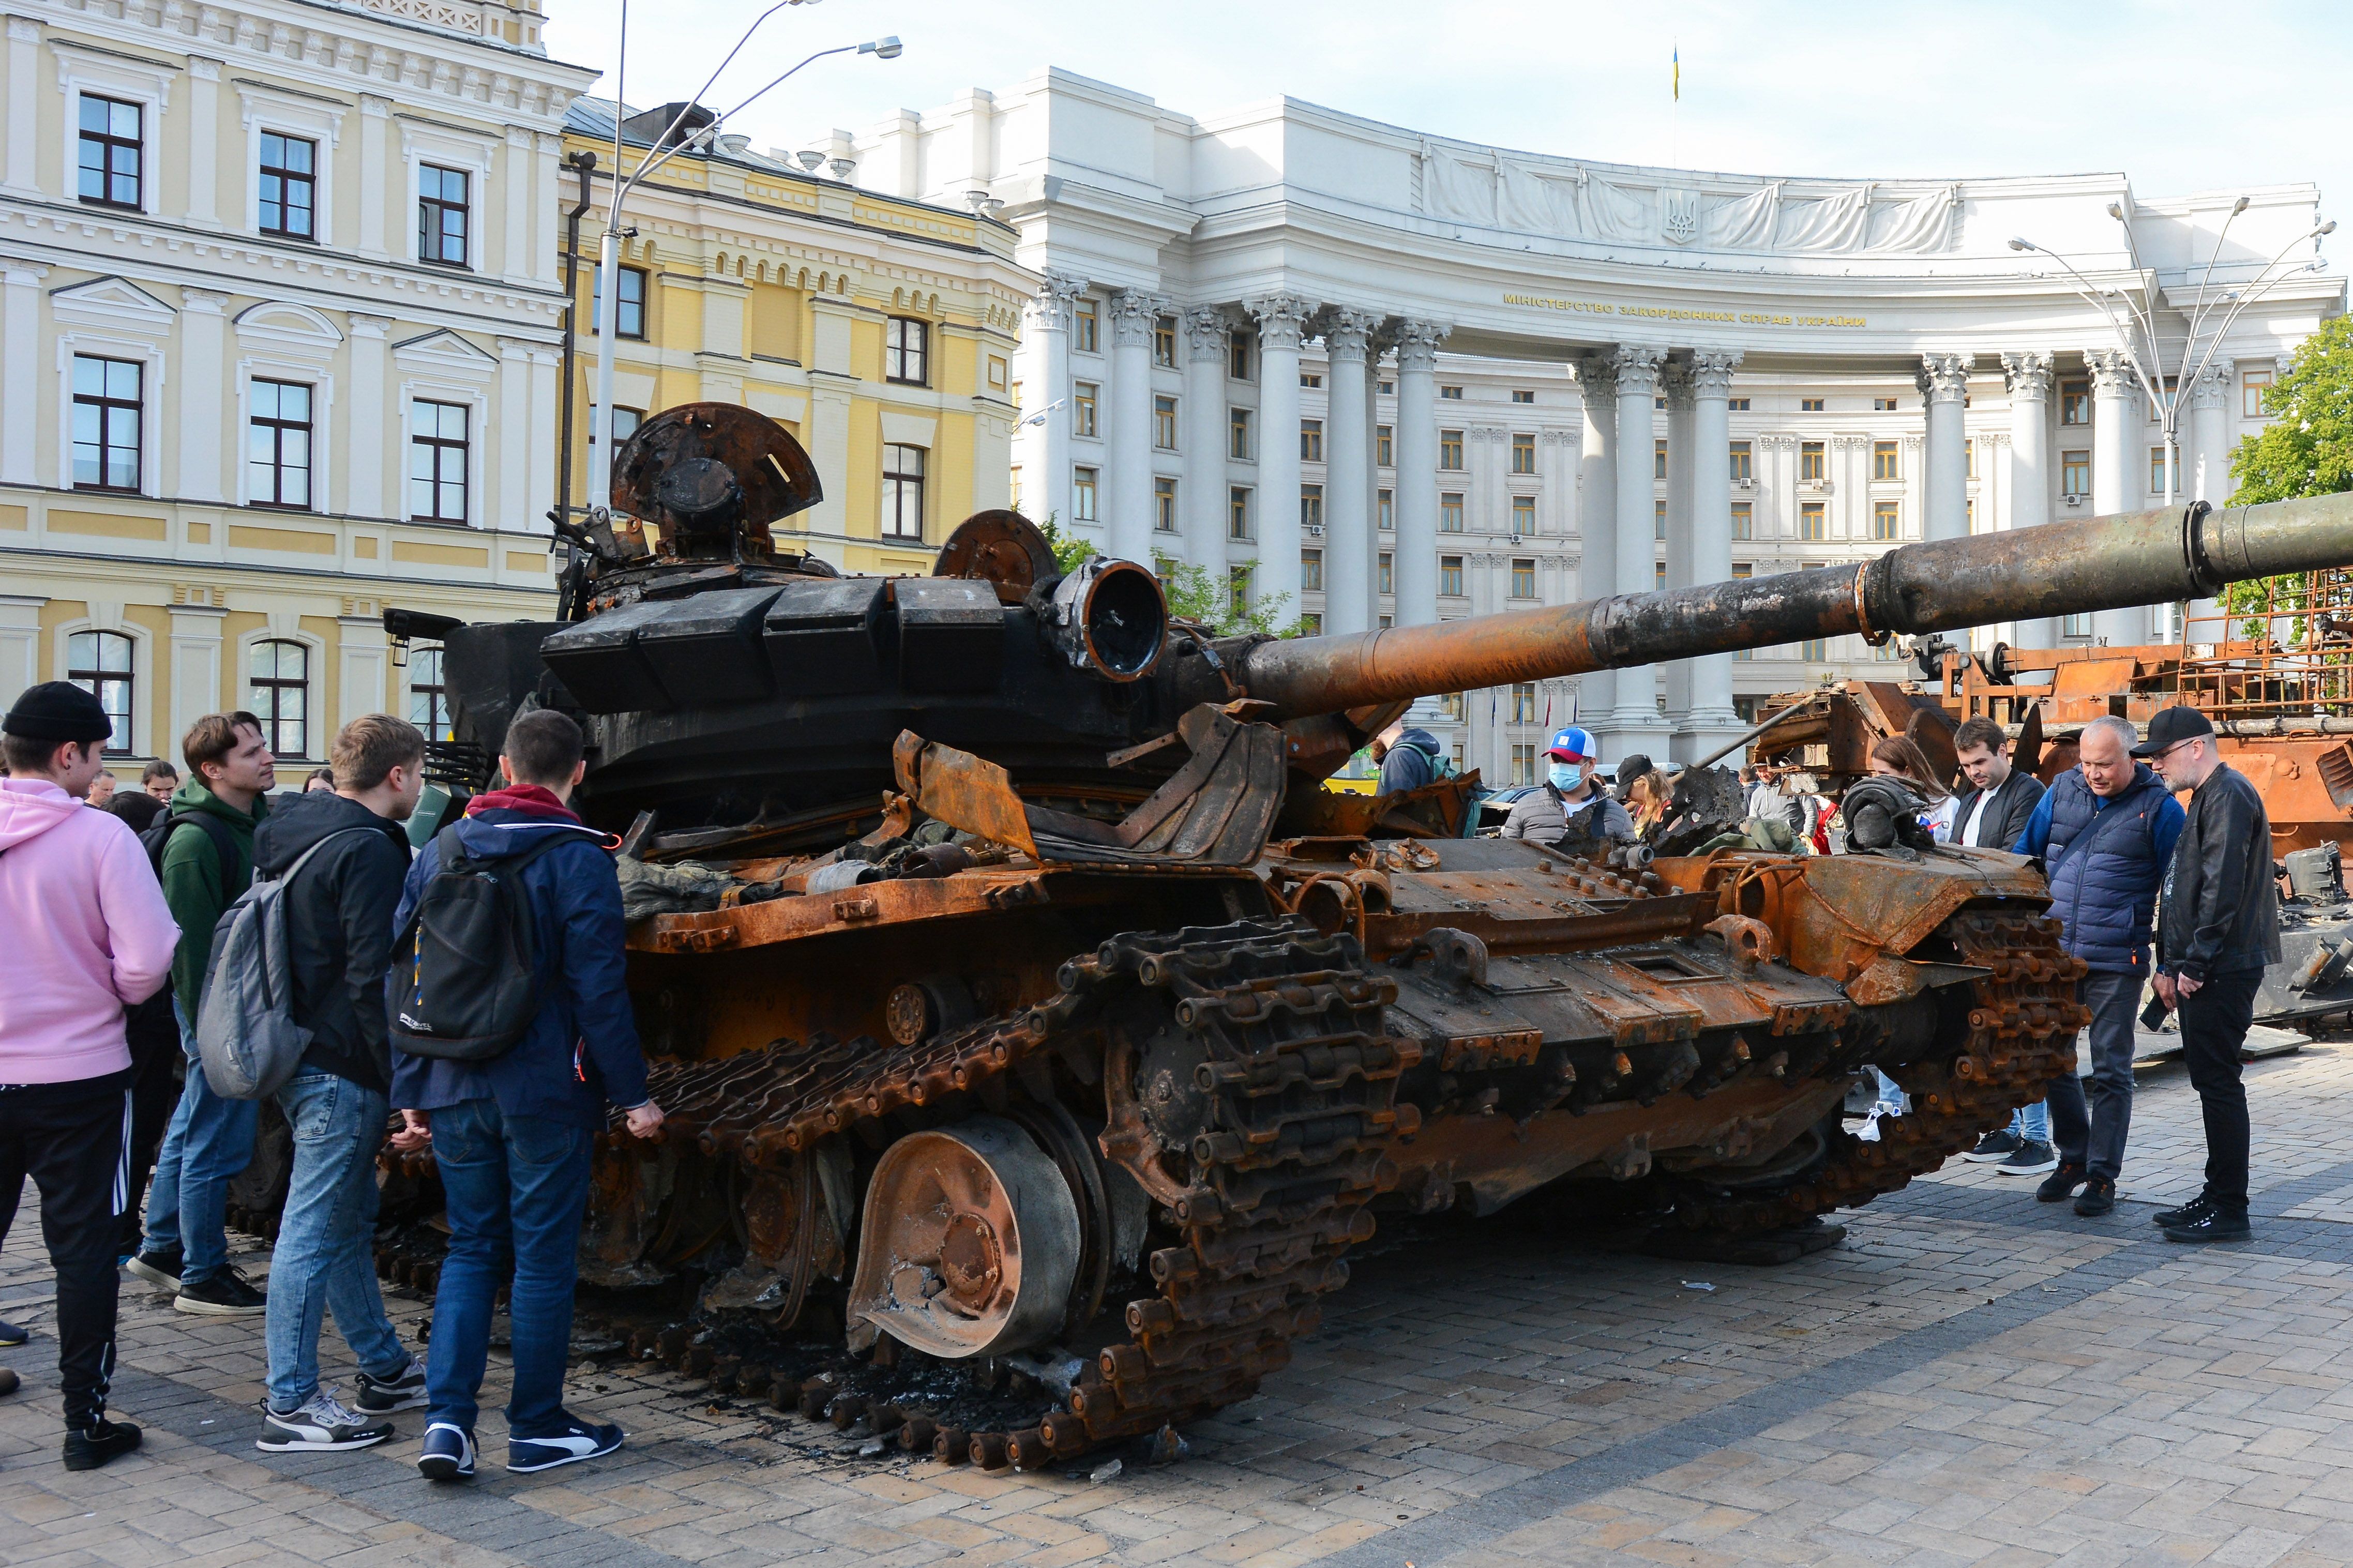 People looking at a Russian tank displayed at Mykhailivska Square in Kyiv on May 23.